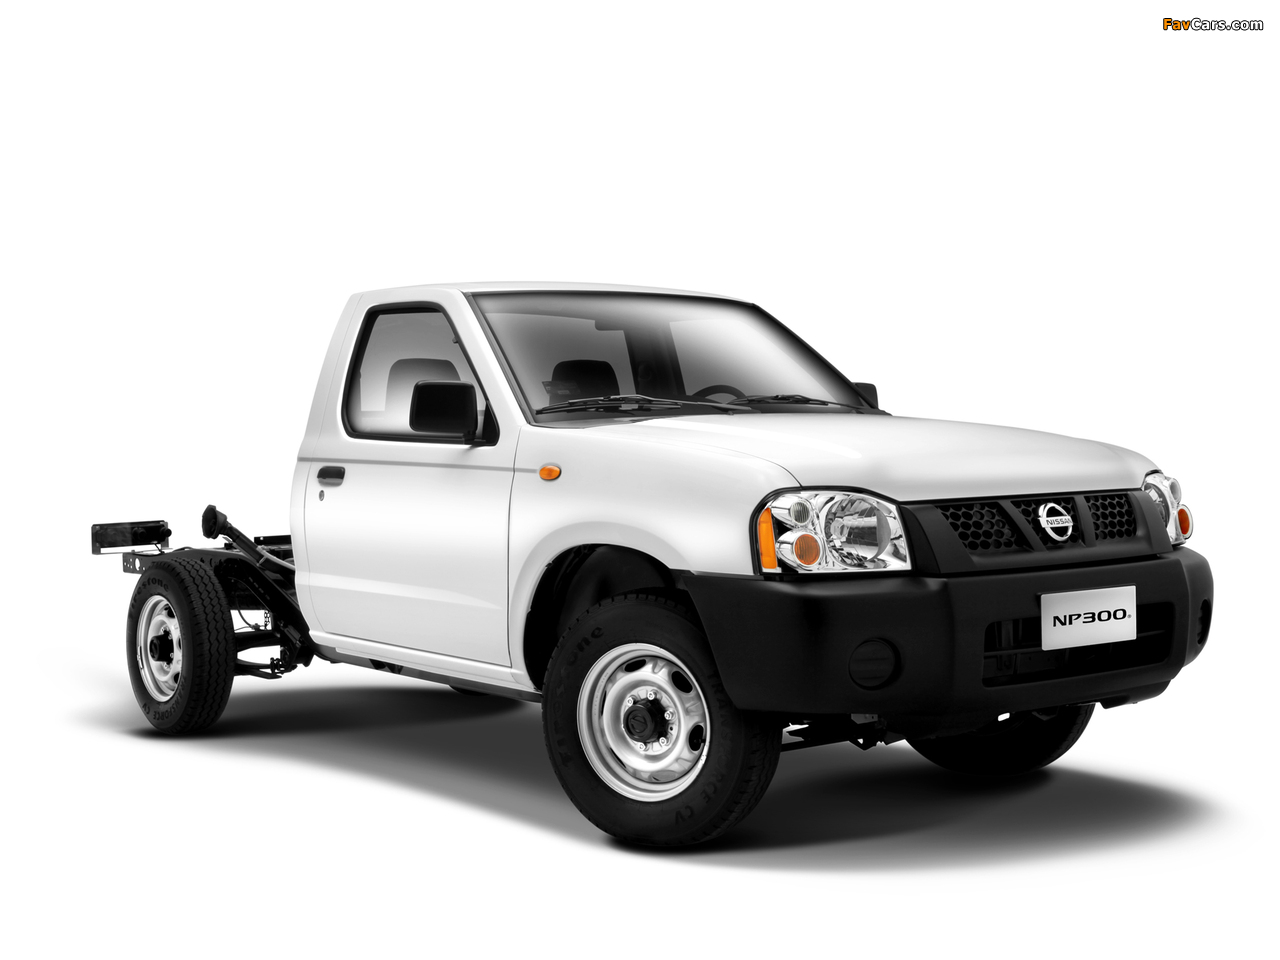 Nissan NP300 Chassis Cab 2008 photos (1280 x 960)